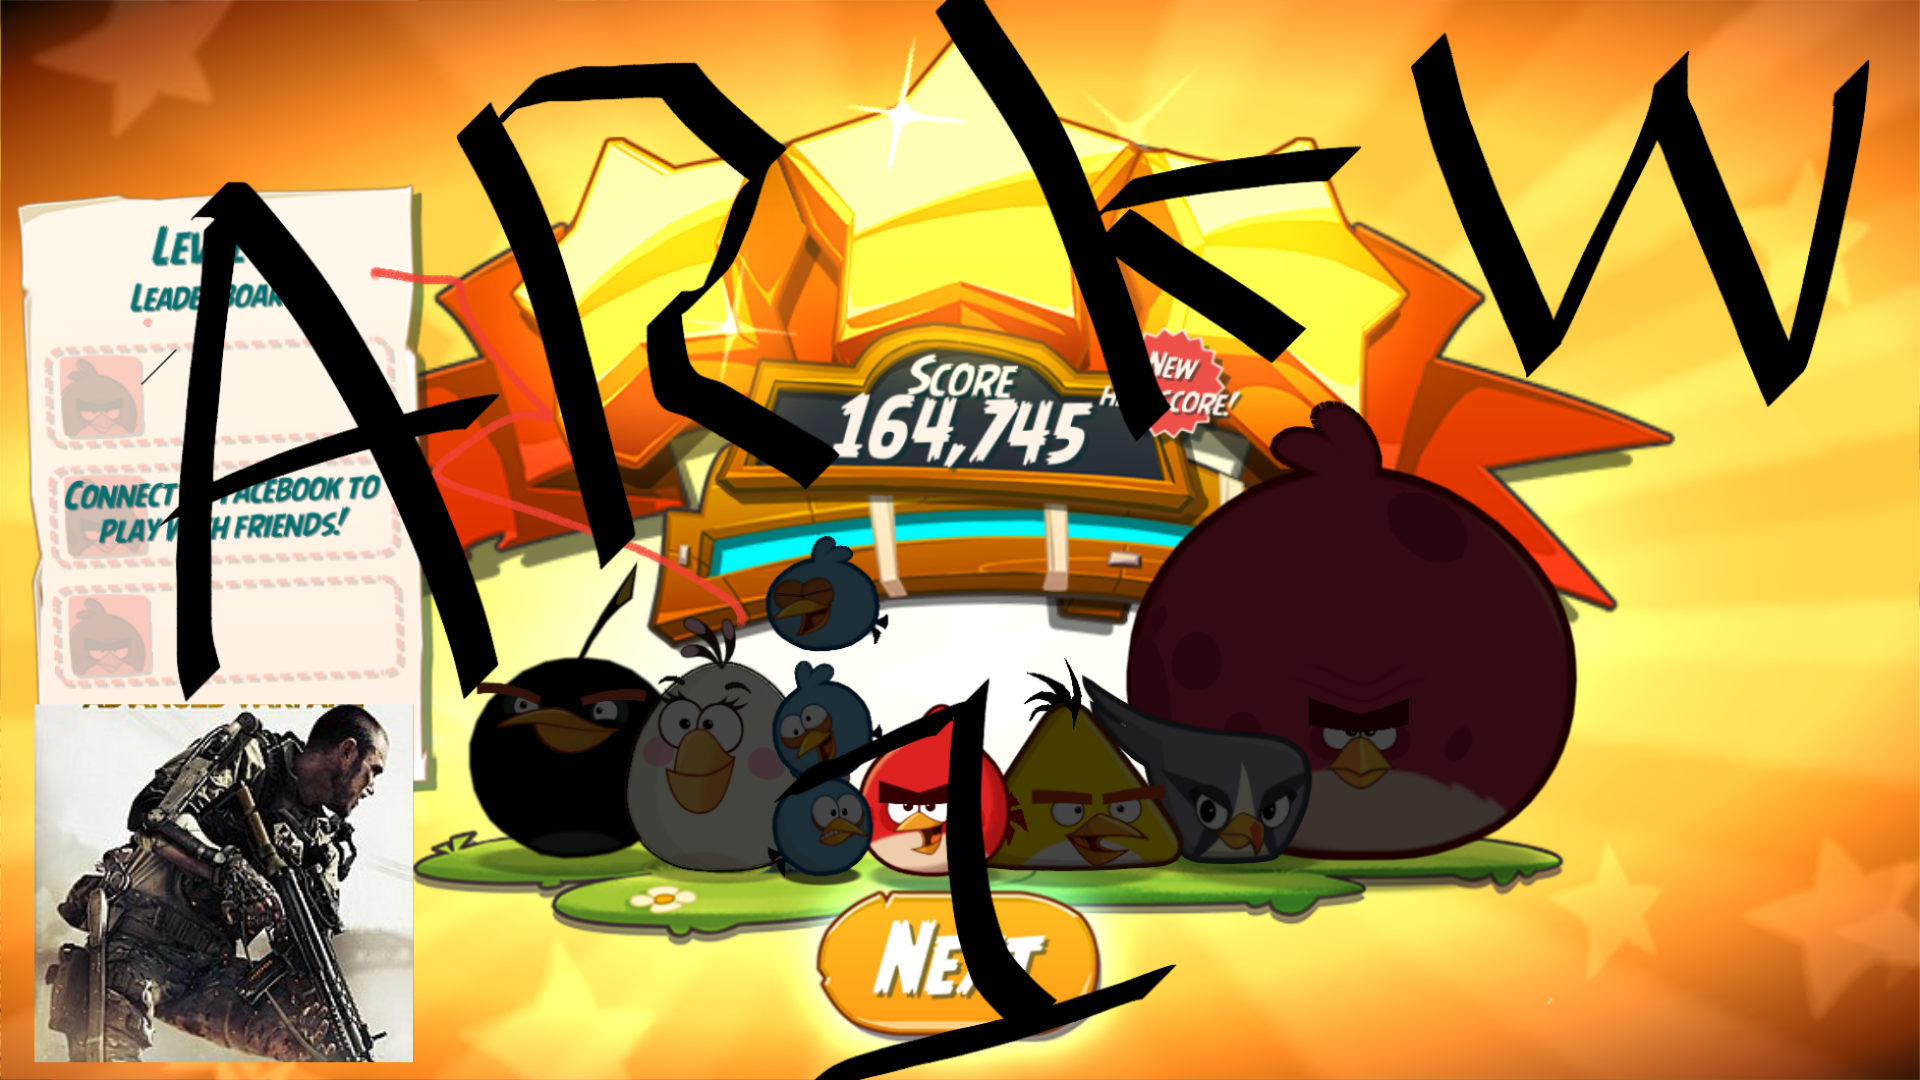 ArkW1: Angry Birds 2: Level 1 (Android) 164,745 points on 2019-05-19 09:24:08